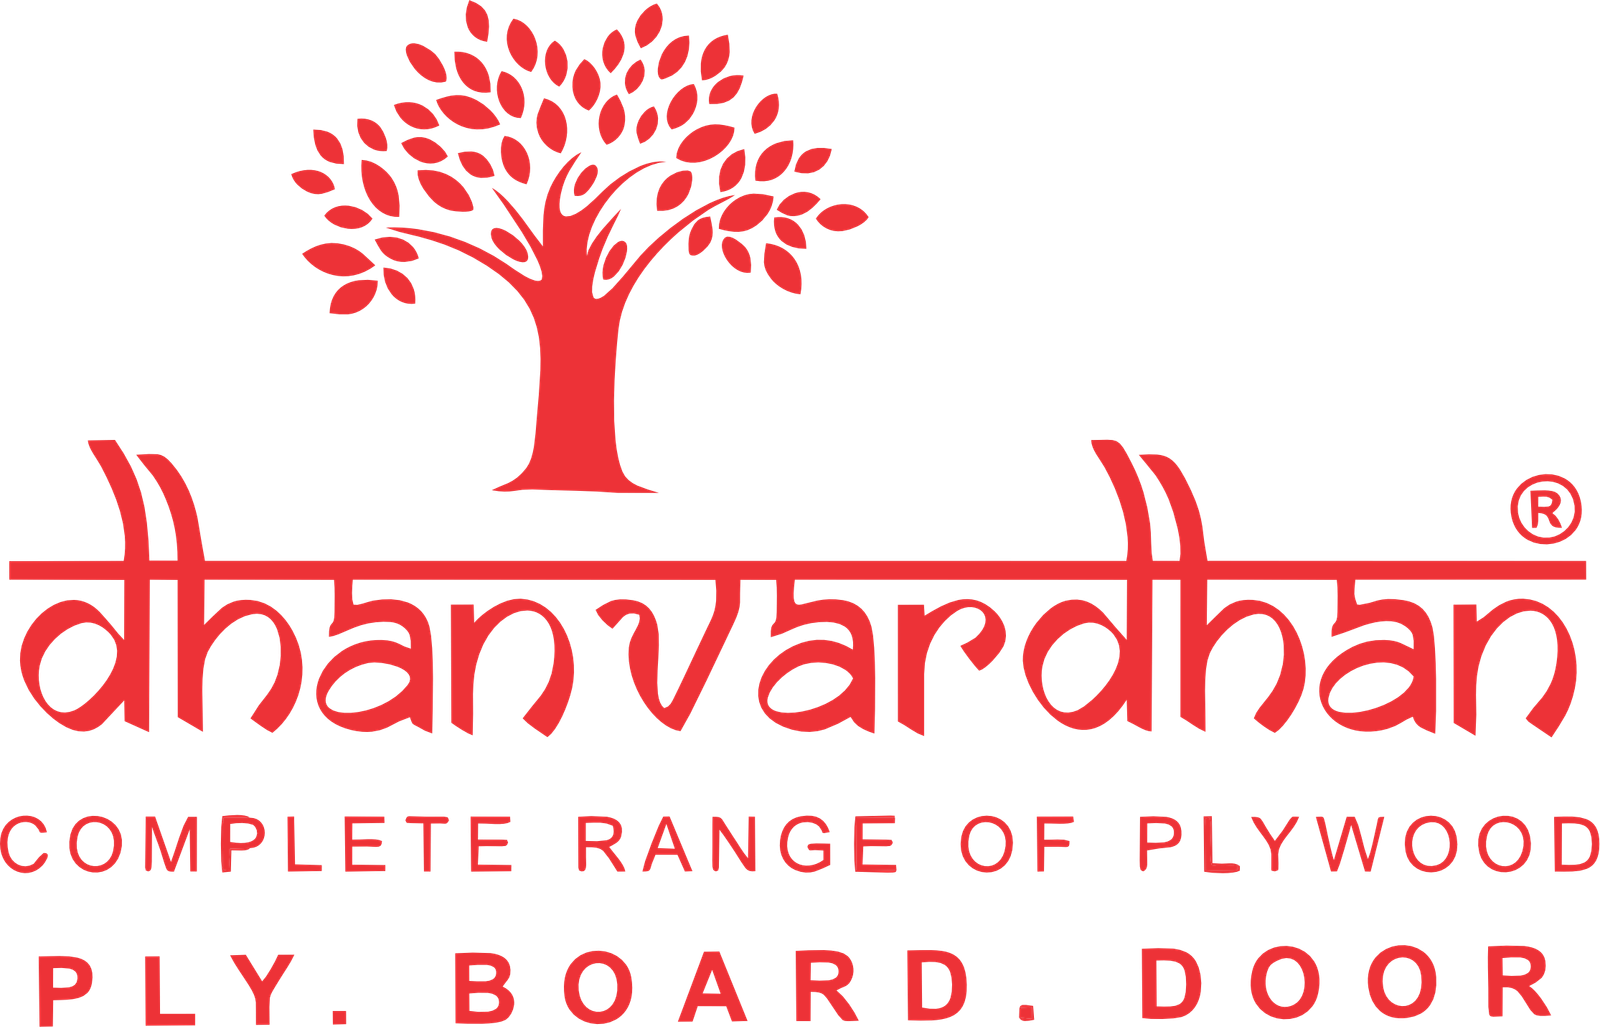 Commercial Plywood Manufacturer - Dhanvardhan Ply